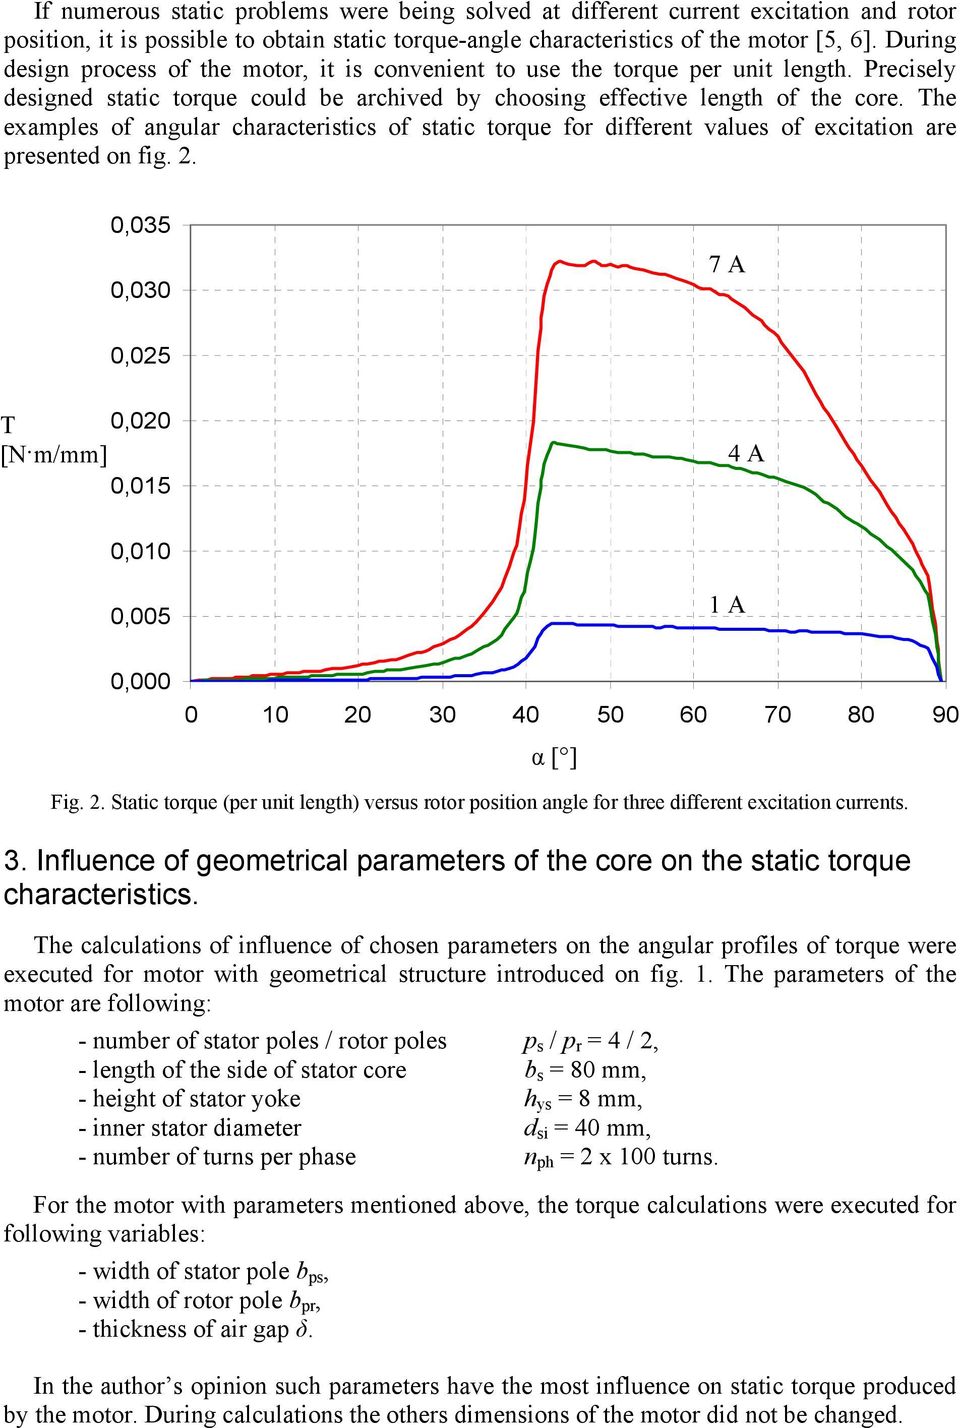 The examples of angular characteristics of static torque for different values of excitation are presented on fig. 2.